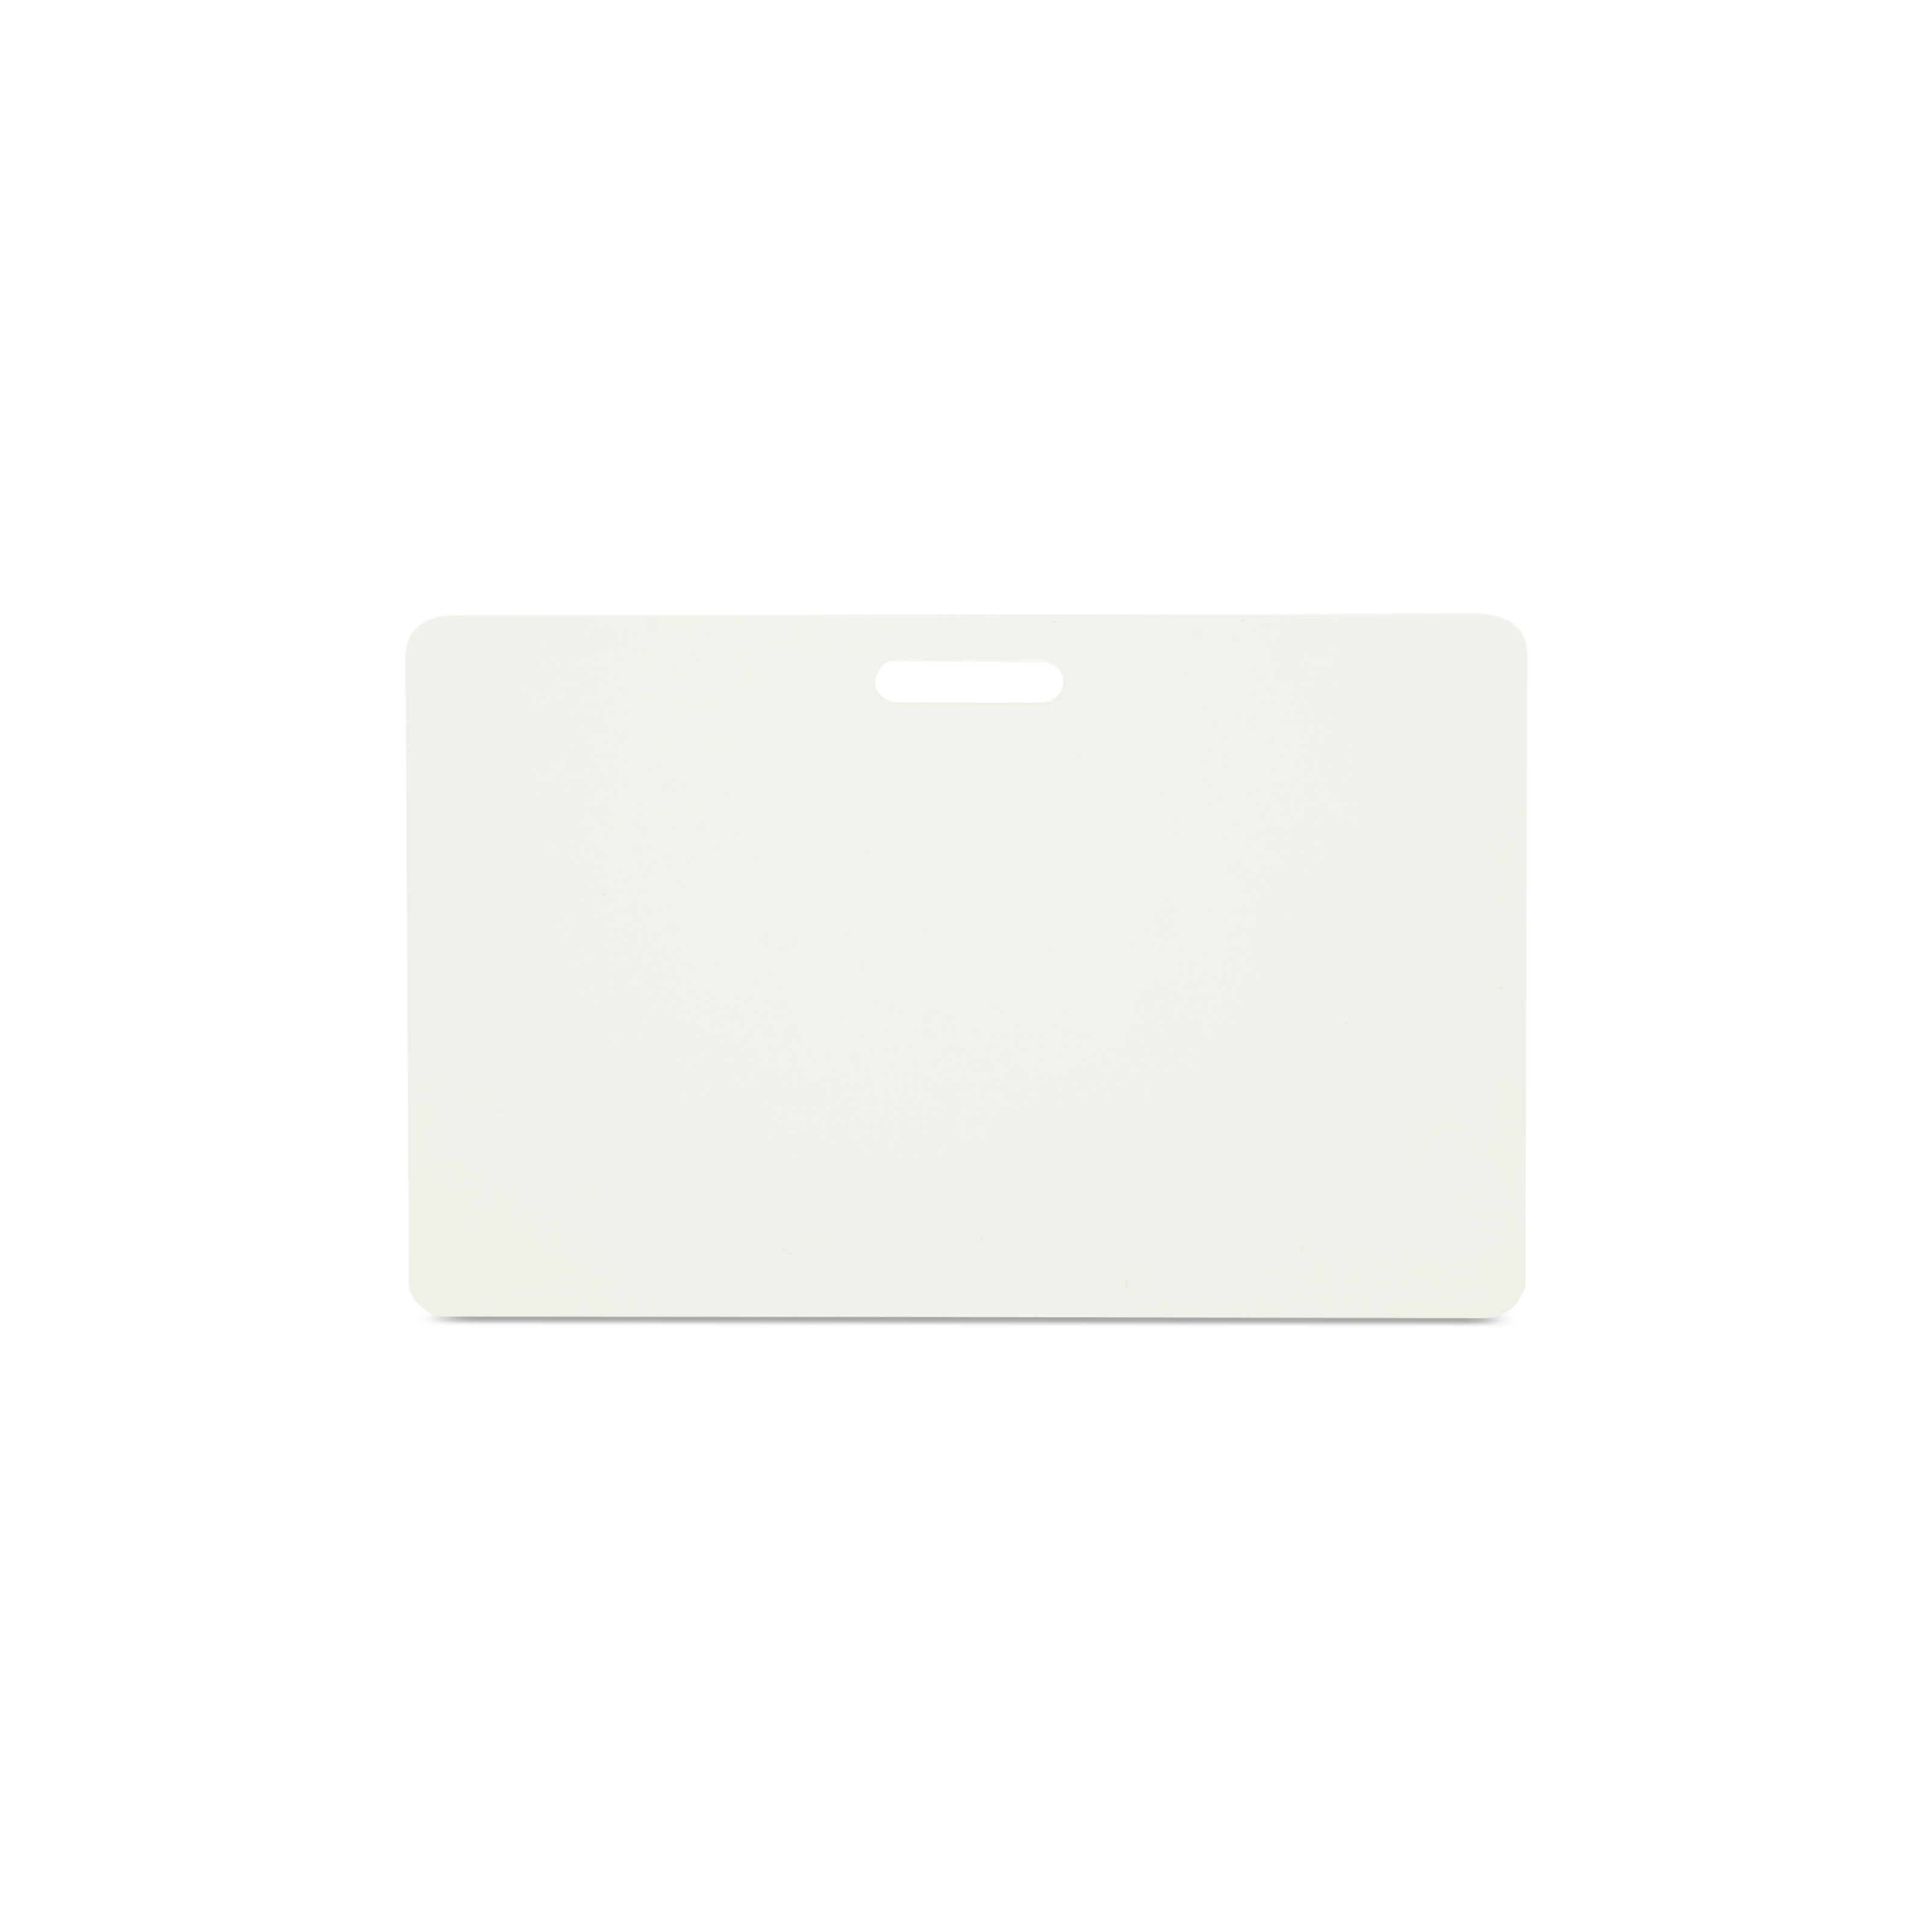 NFC Card PVC - 85,6 x 54 mm - NTAG216 - 924 Byte - white - landscape with slot